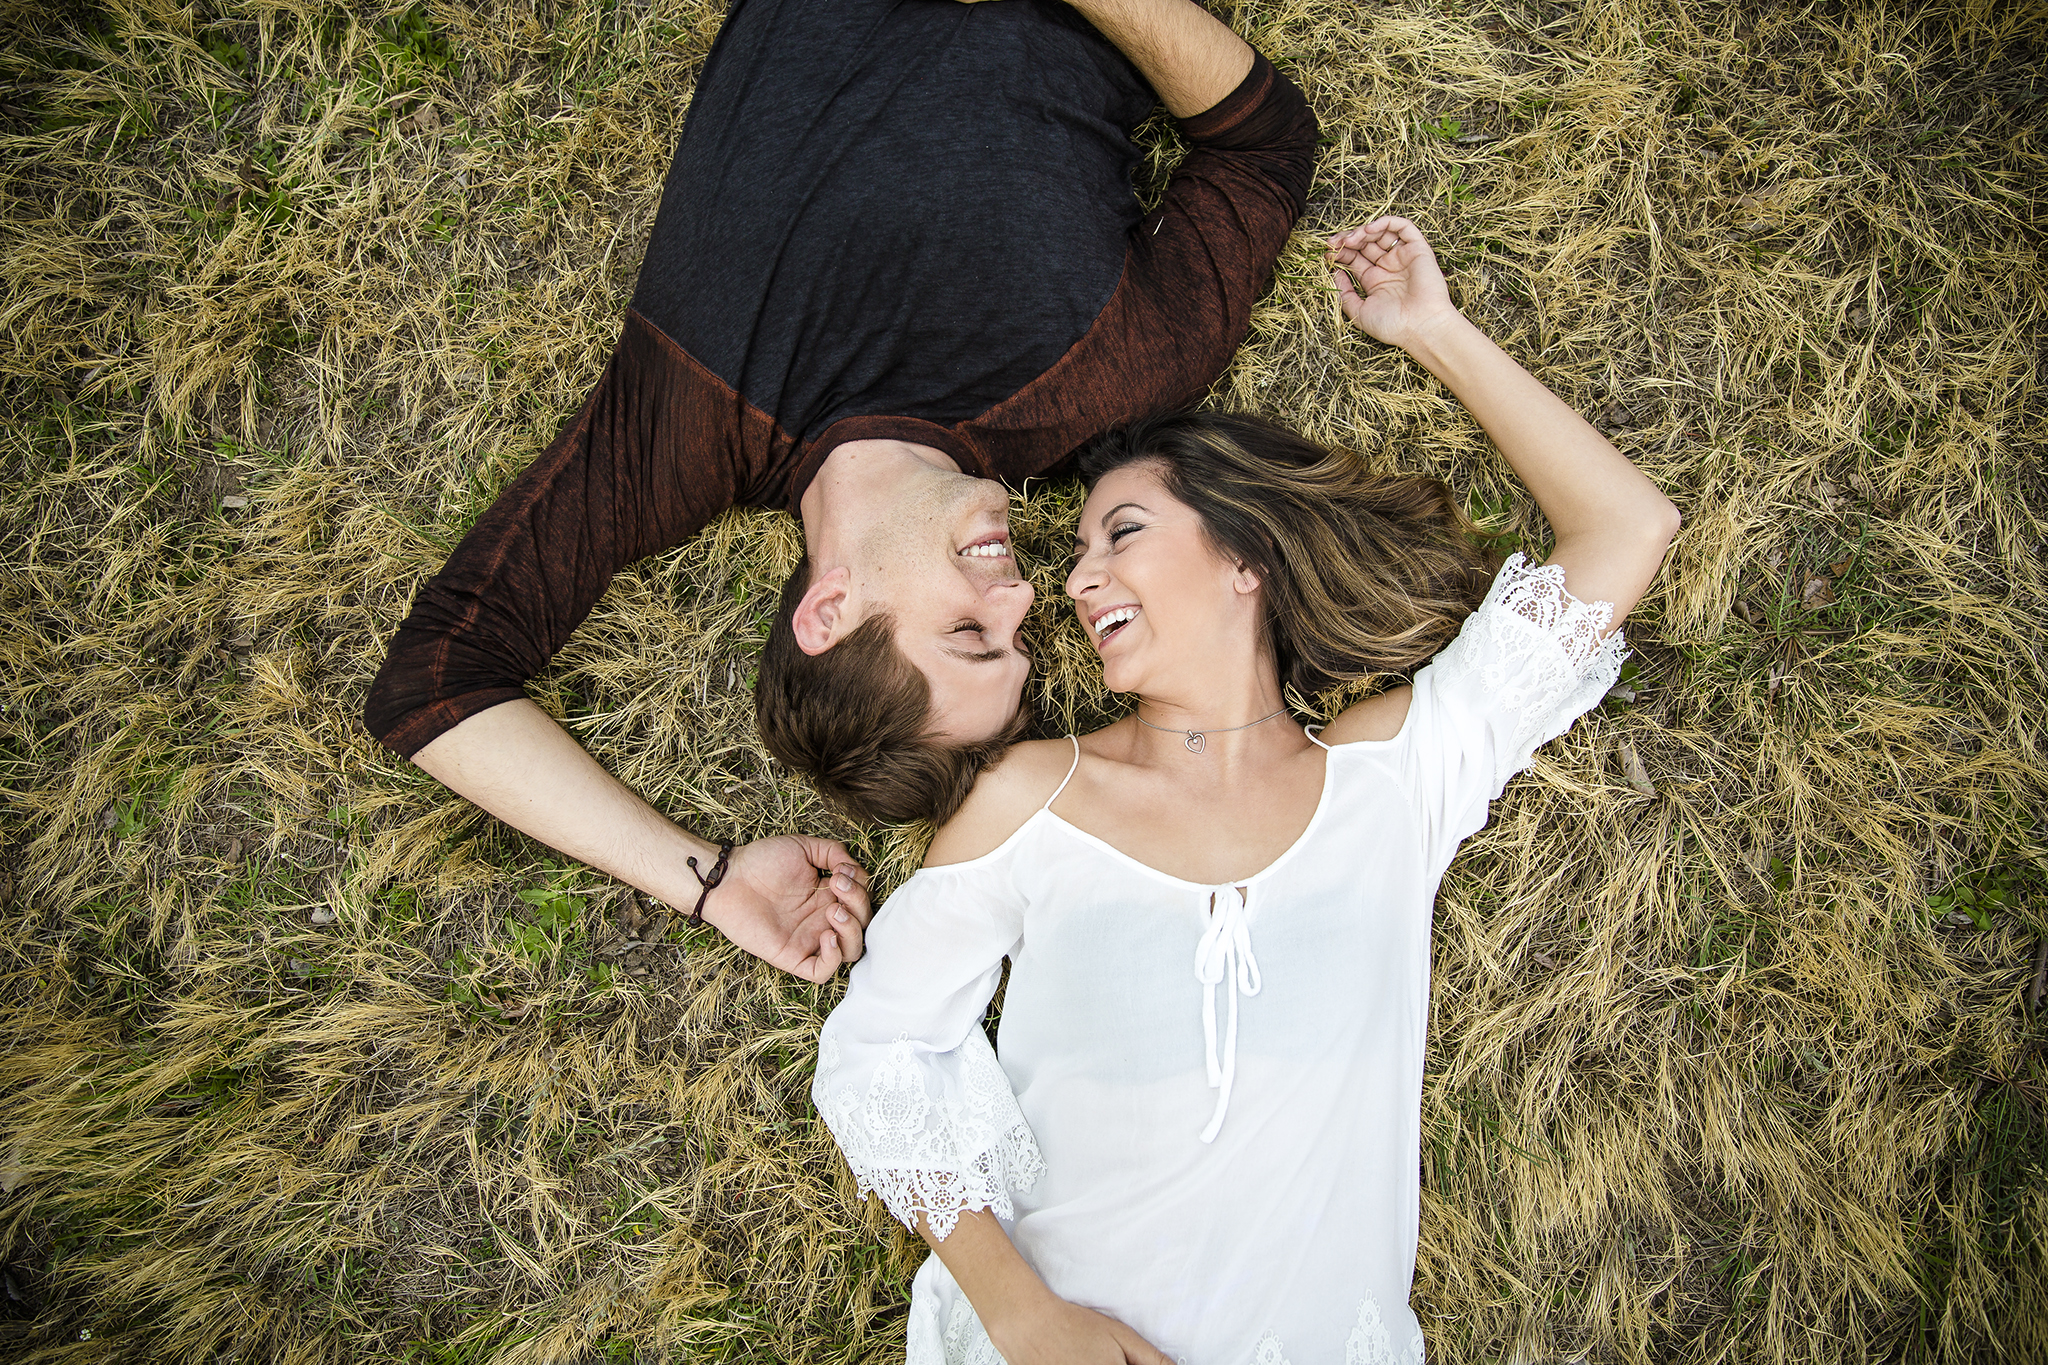 laying in the grass, creative photography, creative posing